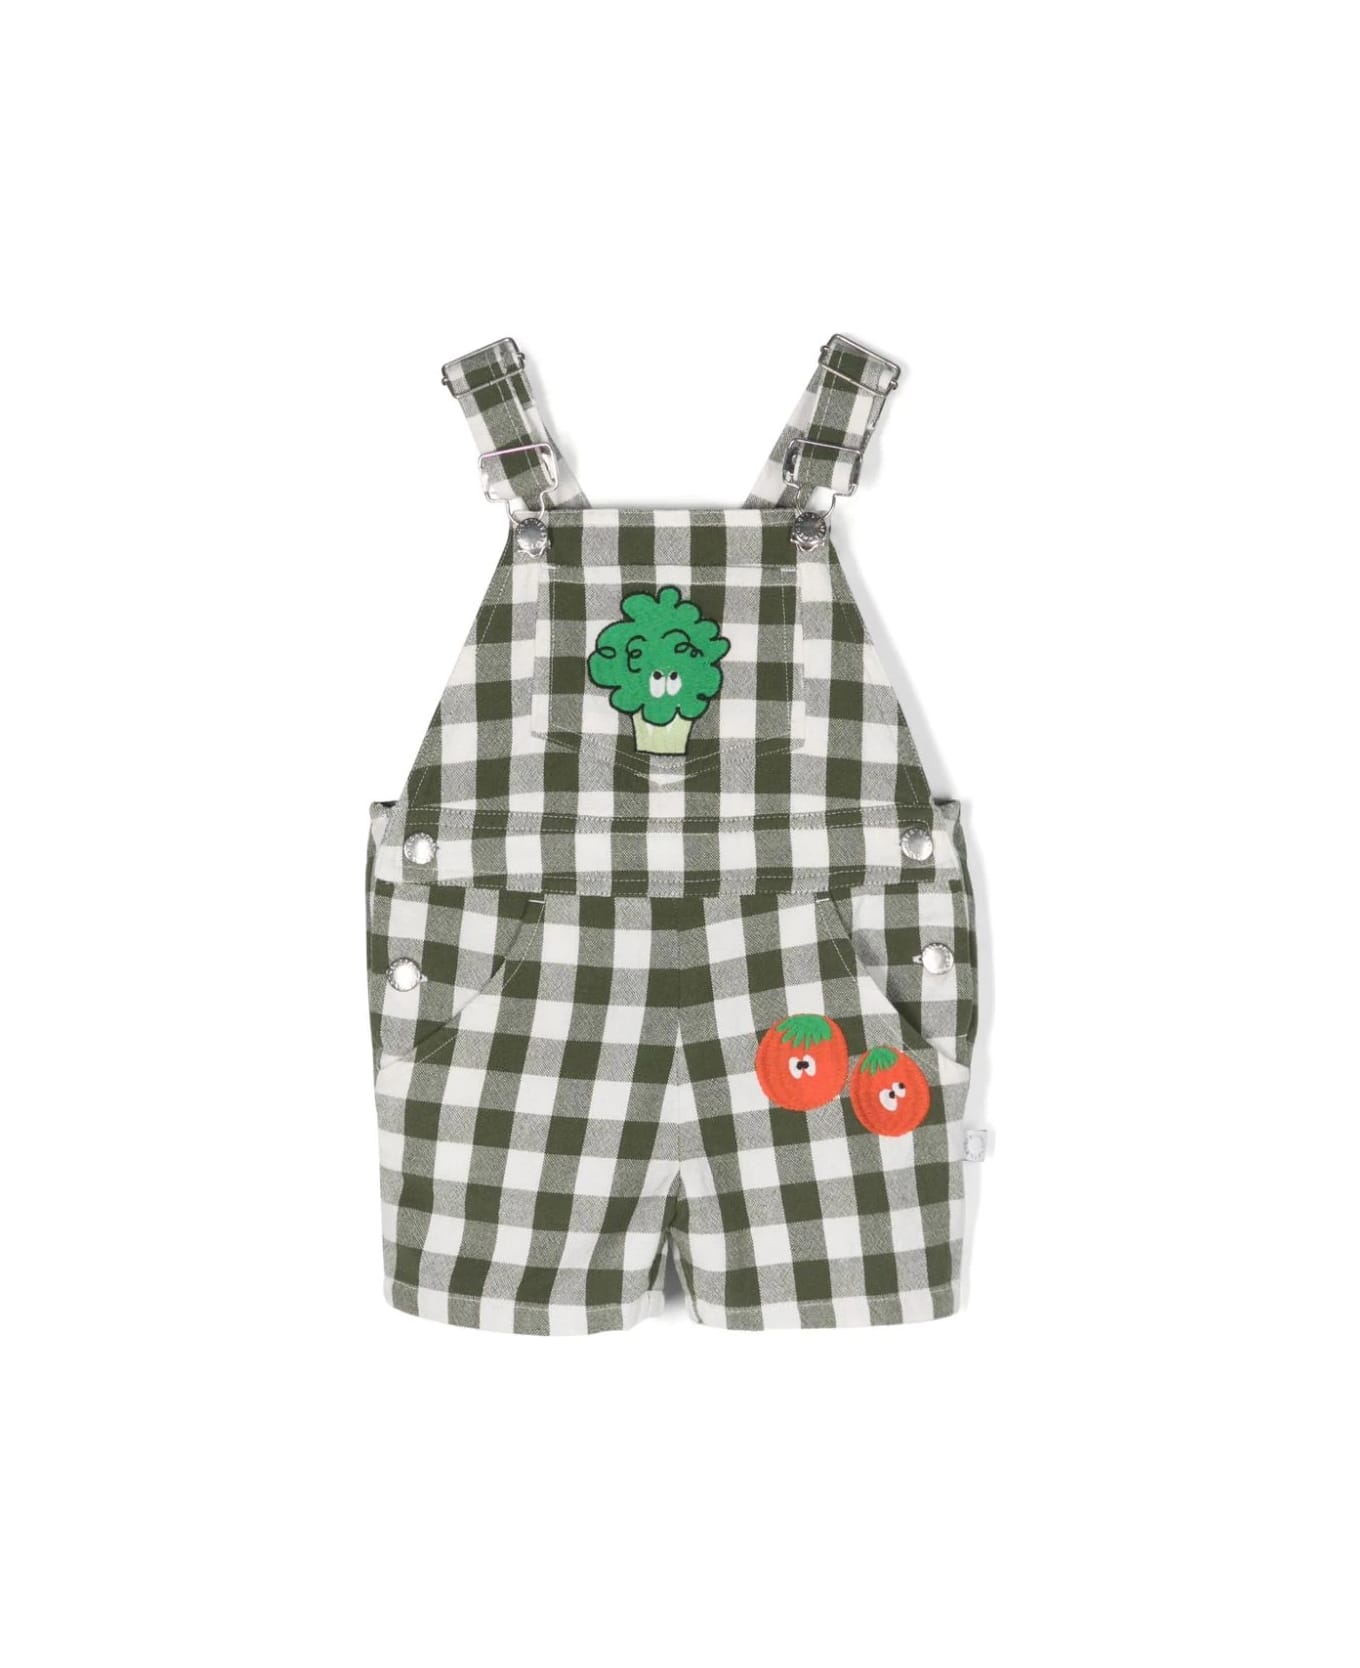 Stella McCartney Kids Dungarees With Embroidery - Green